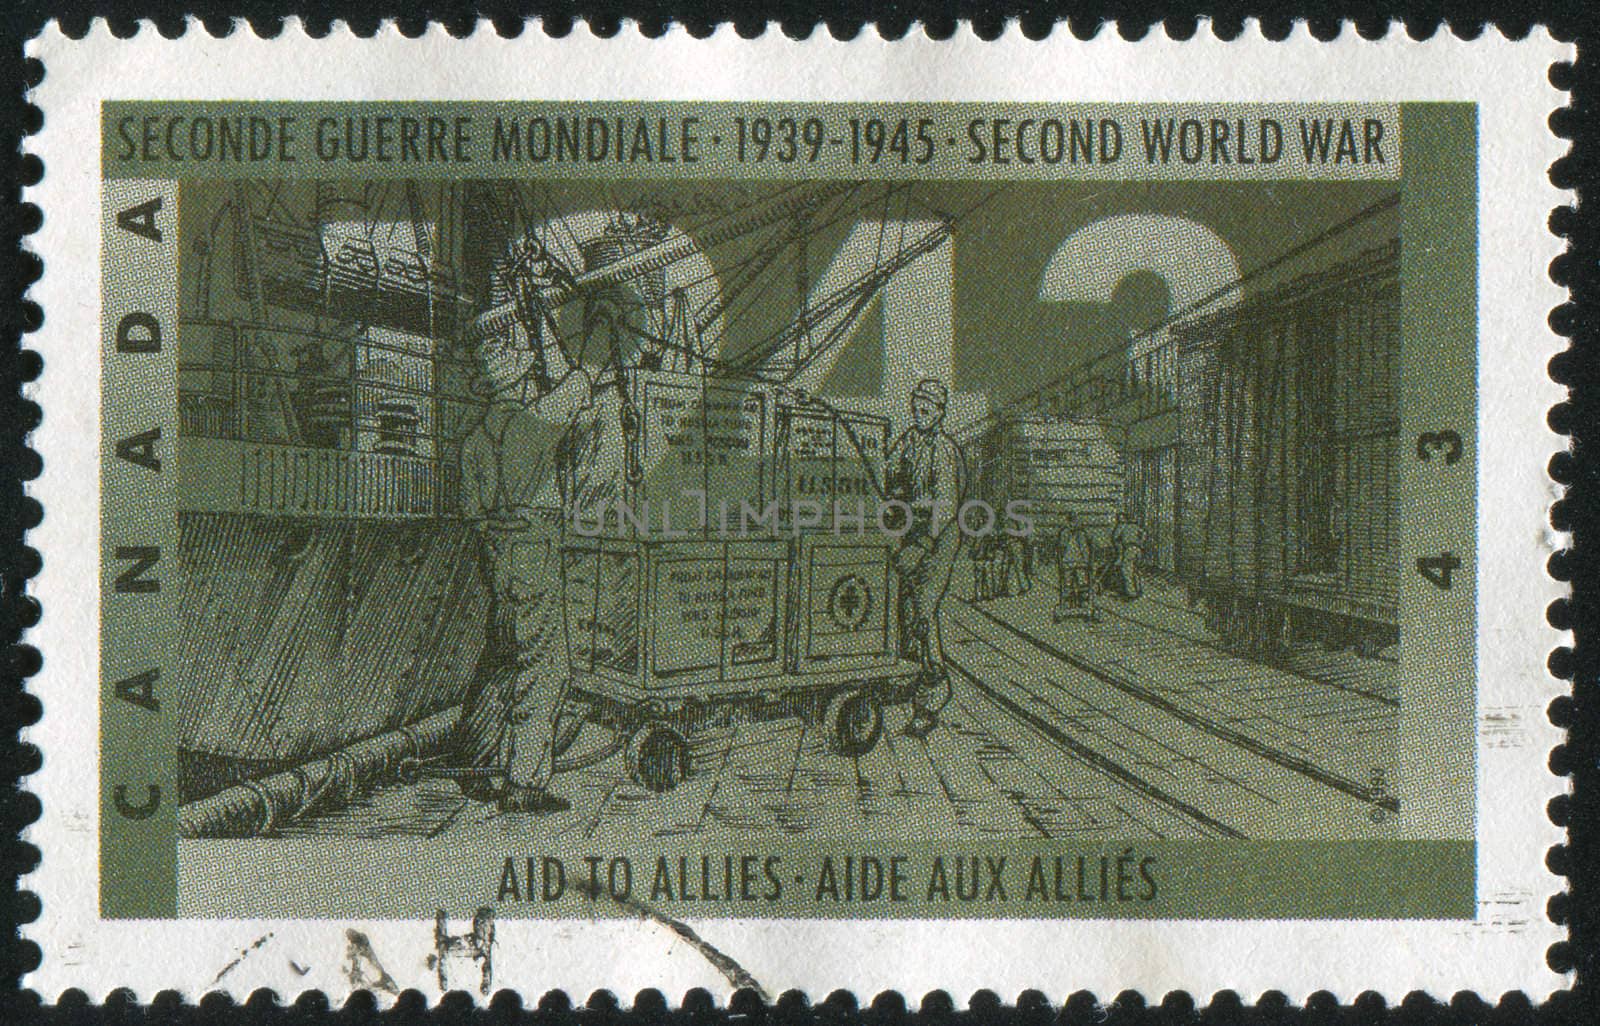 CANADA - CIRCA 1993: stamp printed by Canada, shows Aid to Allies, circa 1993